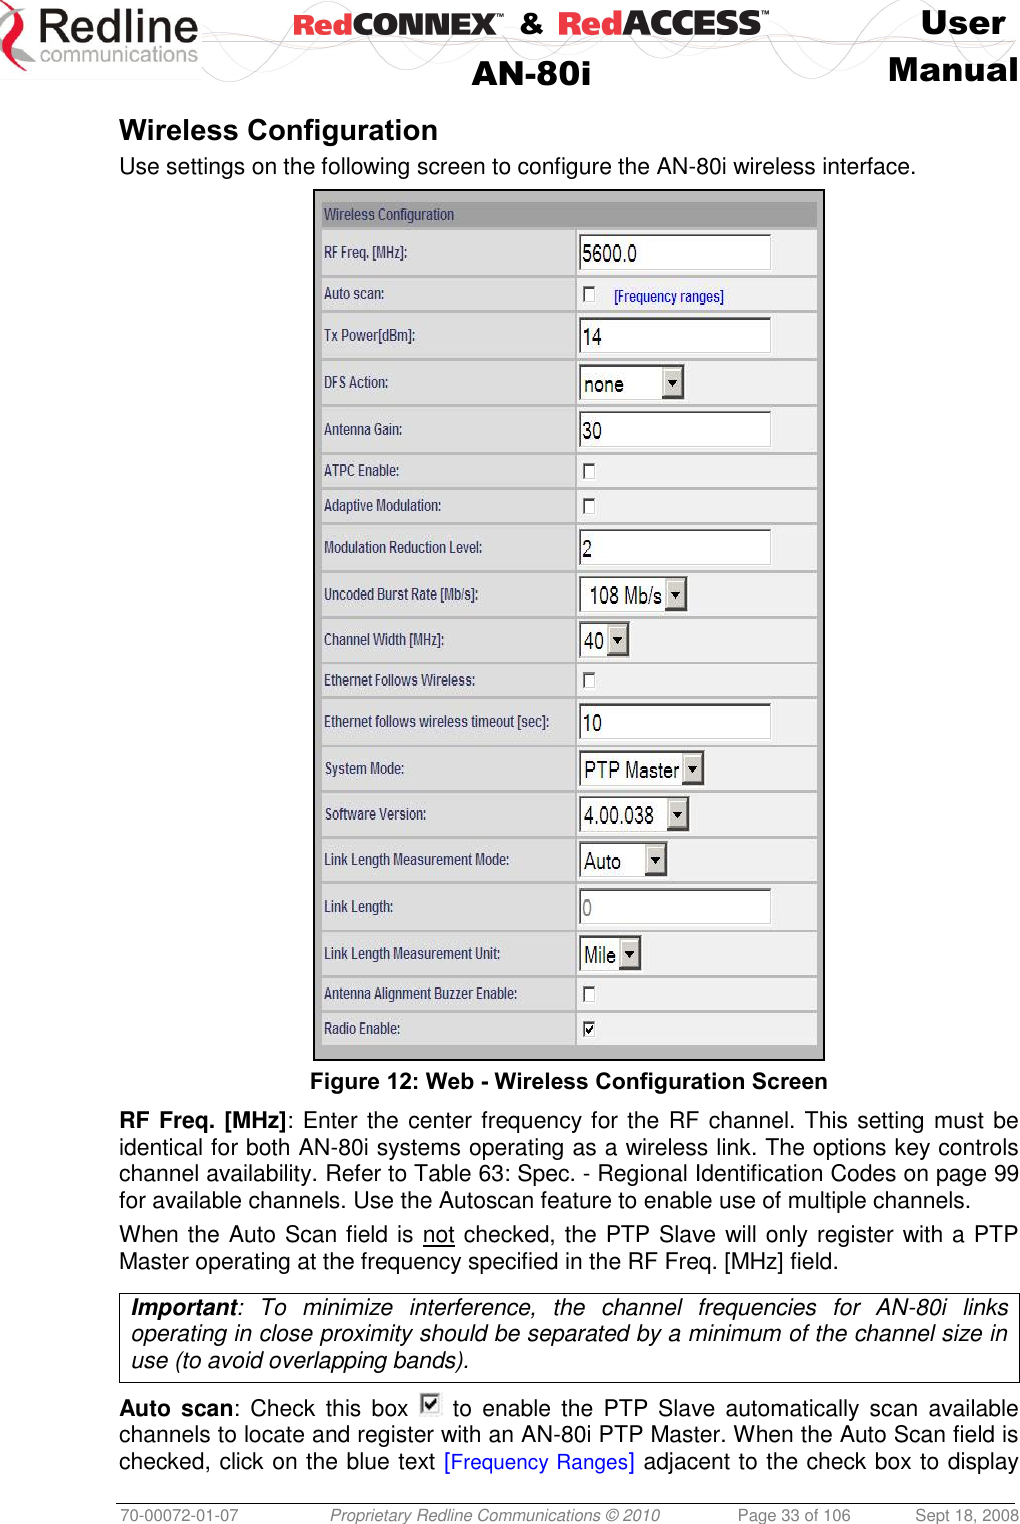    &amp;  User  AN-80i Manual  70-00072-01-07 Proprietary Redline Communications © 2010  Page 33 of 106  Sept 18, 2008  Wireless Configuration Use settings on the following screen to configure the AN-80i wireless interface.  Figure 12: Web - Wireless Configuration Screen RF Freq. [MHz]: Enter the center frequency for the RF channel. This setting must be identical for both AN-80i systems operating as a wireless link. The options key controls channel availability. Refer to Table 63: Spec. - Regional Identification Codes on page 99 for available channels. Use the Autoscan feature to enable use of multiple channels. When the Auto Scan field is not checked, the PTP Slave will only register with a PTP Master operating at the frequency specified in the RF Freq. [MHz] field.  Important:  To  minimize  interference,  the  channel  frequencies  for  AN-80i  links operating in close proximity should be separated by a minimum of the channel size in use (to avoid overlapping bands).  Auto  scan: Check  this  box    to  enable the  PTP  Slave automatically  scan  available channels to locate and register with an AN-80i PTP Master. When the Auto Scan field is checked, click on the blue text [Frequency Ranges] adjacent to the check box to display 